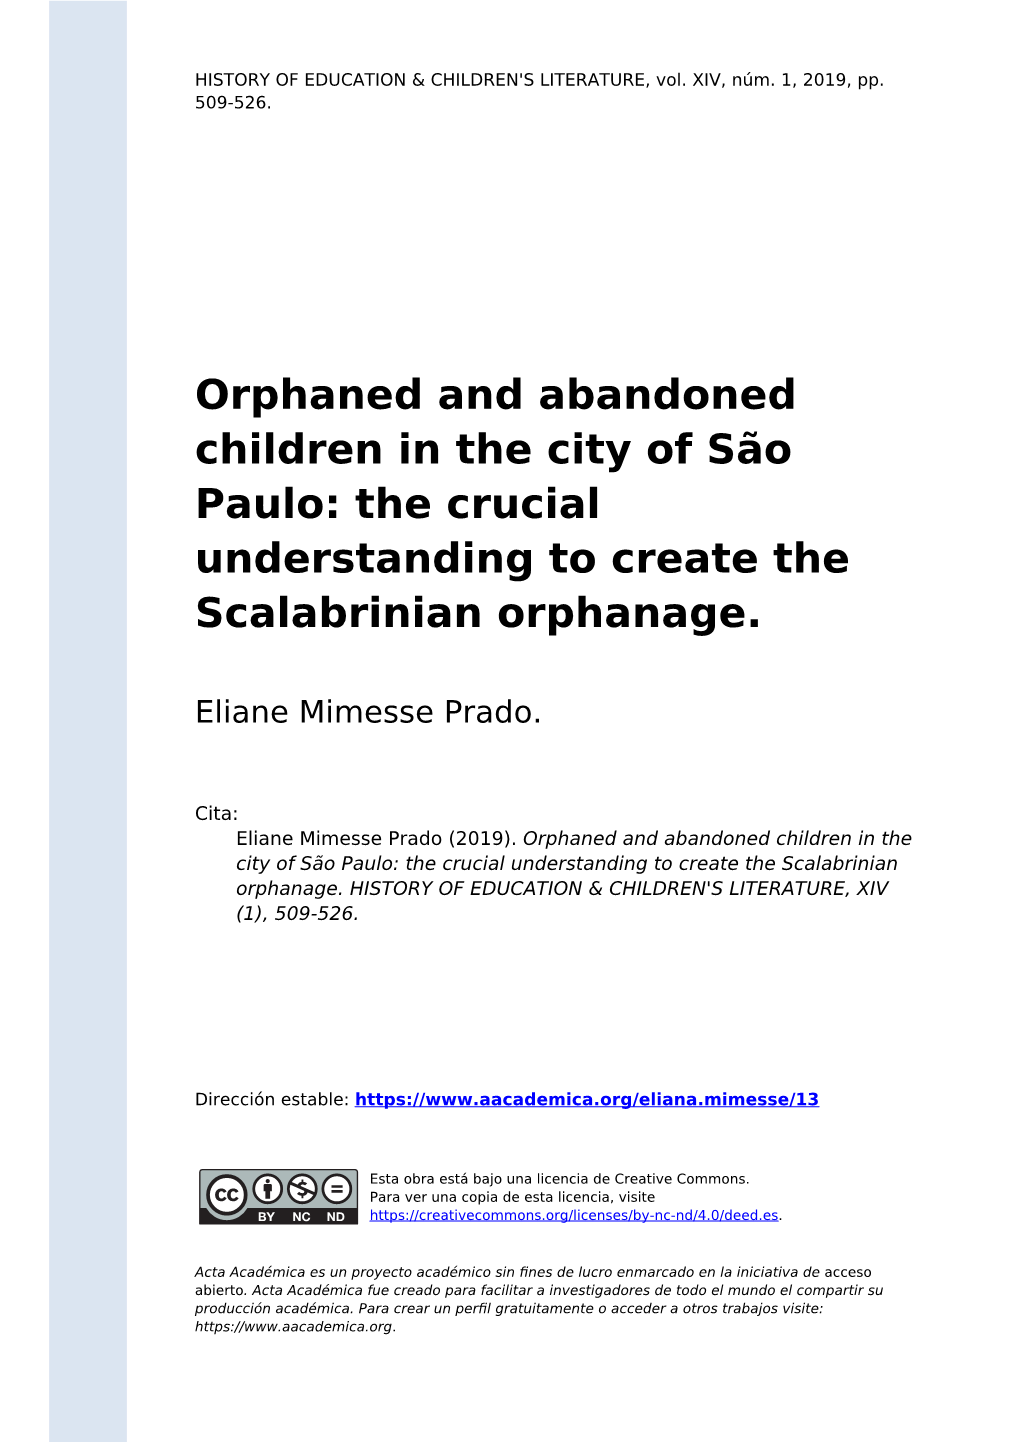 The Crucial Understanding to Create the Scalabrinian Orphanage